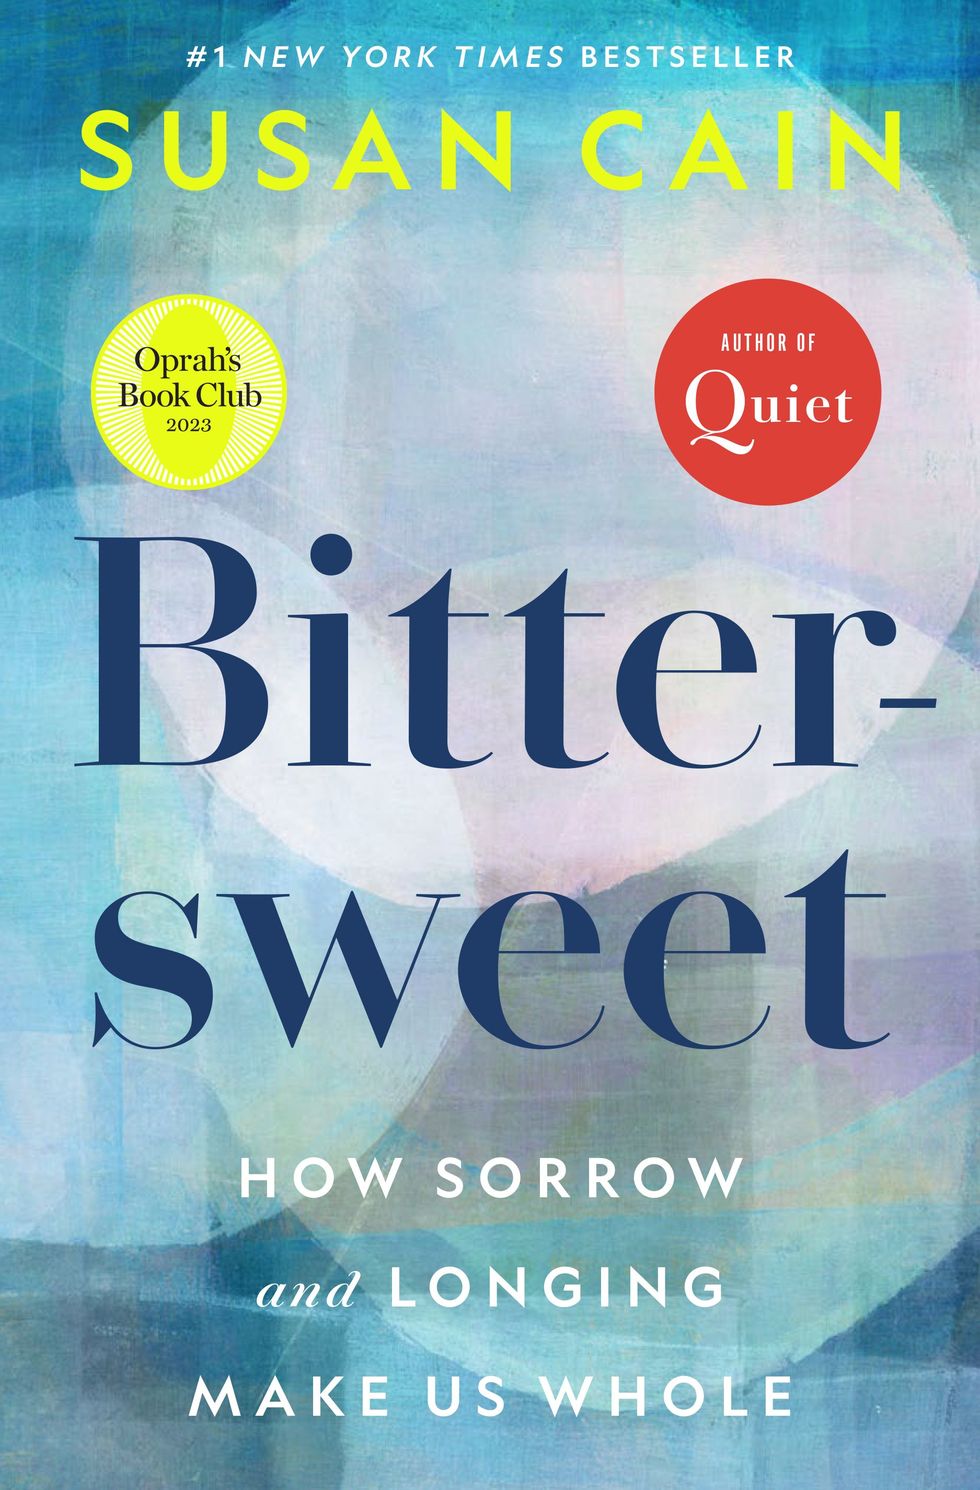 Bittersweet: How Sorrow and Longing Make Us Whole